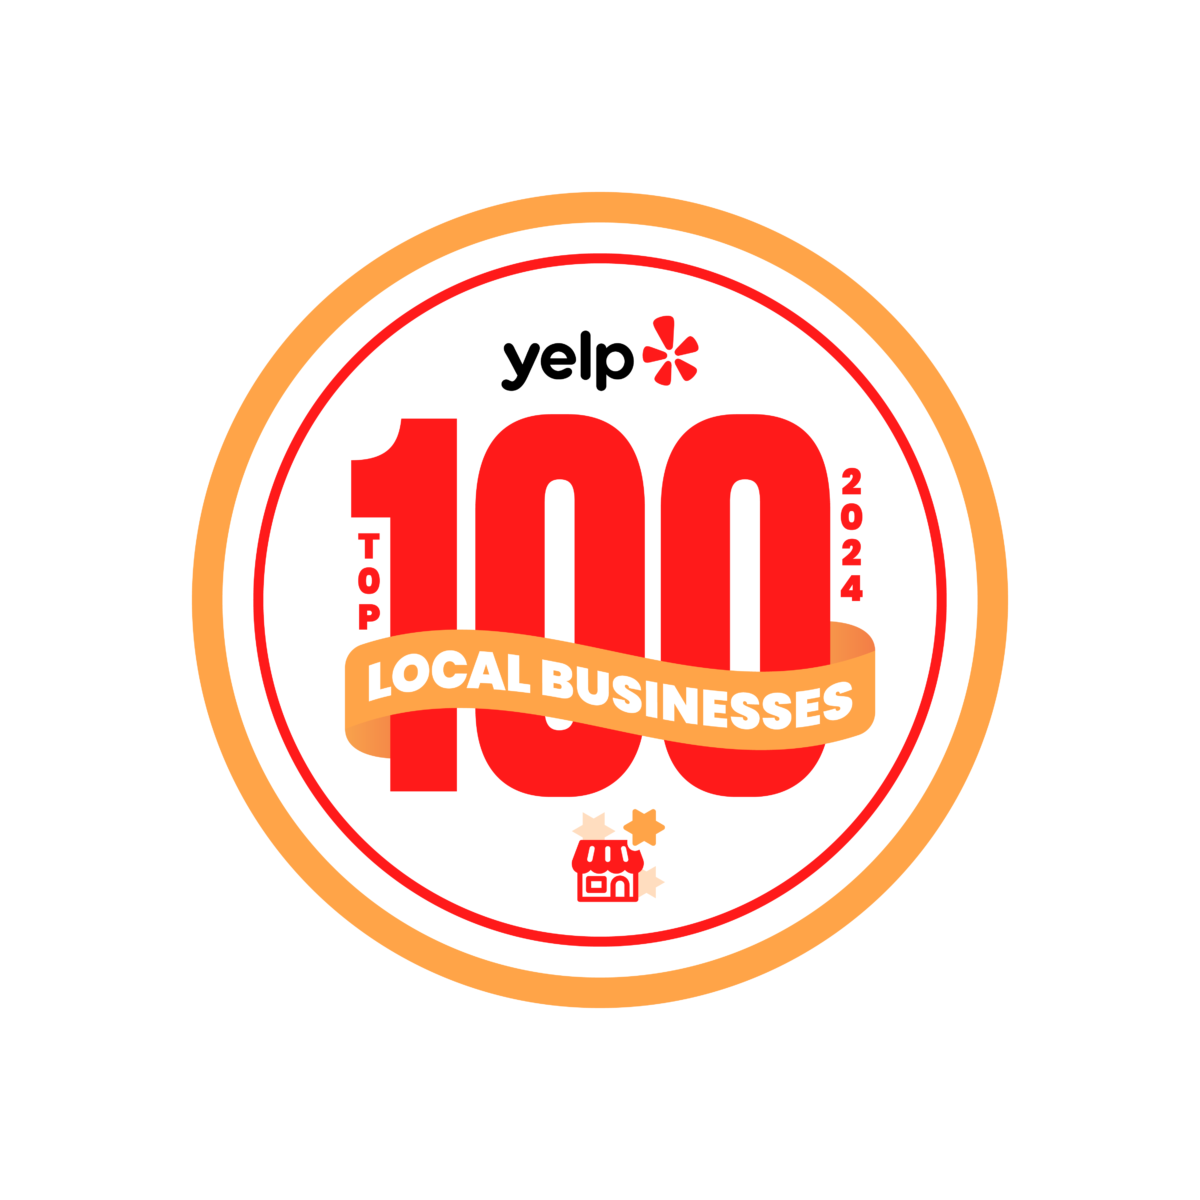 Chicago Pet Sitters is one of Yelp's Top 100 Local Businesses in the United States